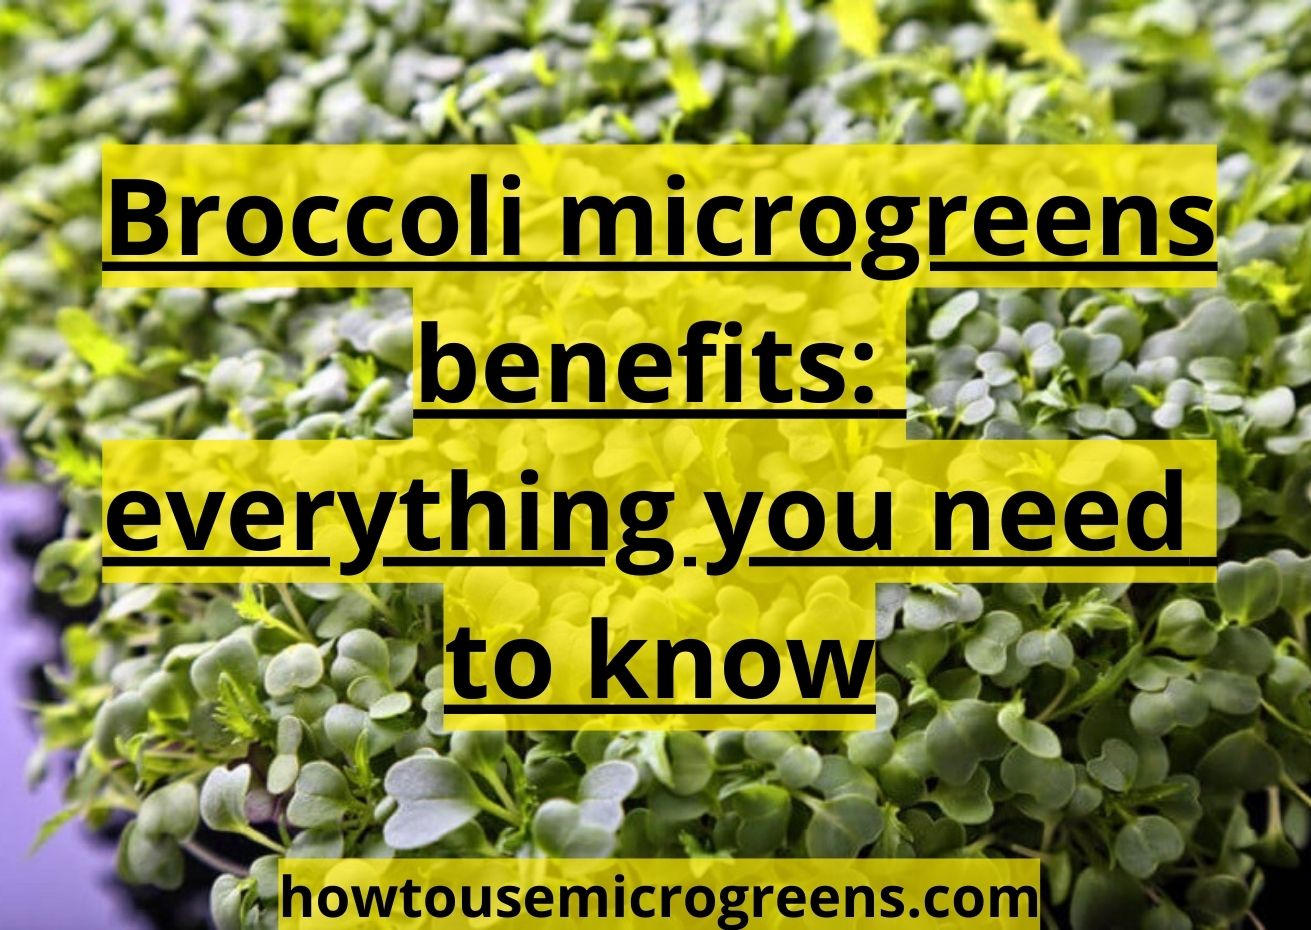 10+ broccoli microgreens benefits: the best guide